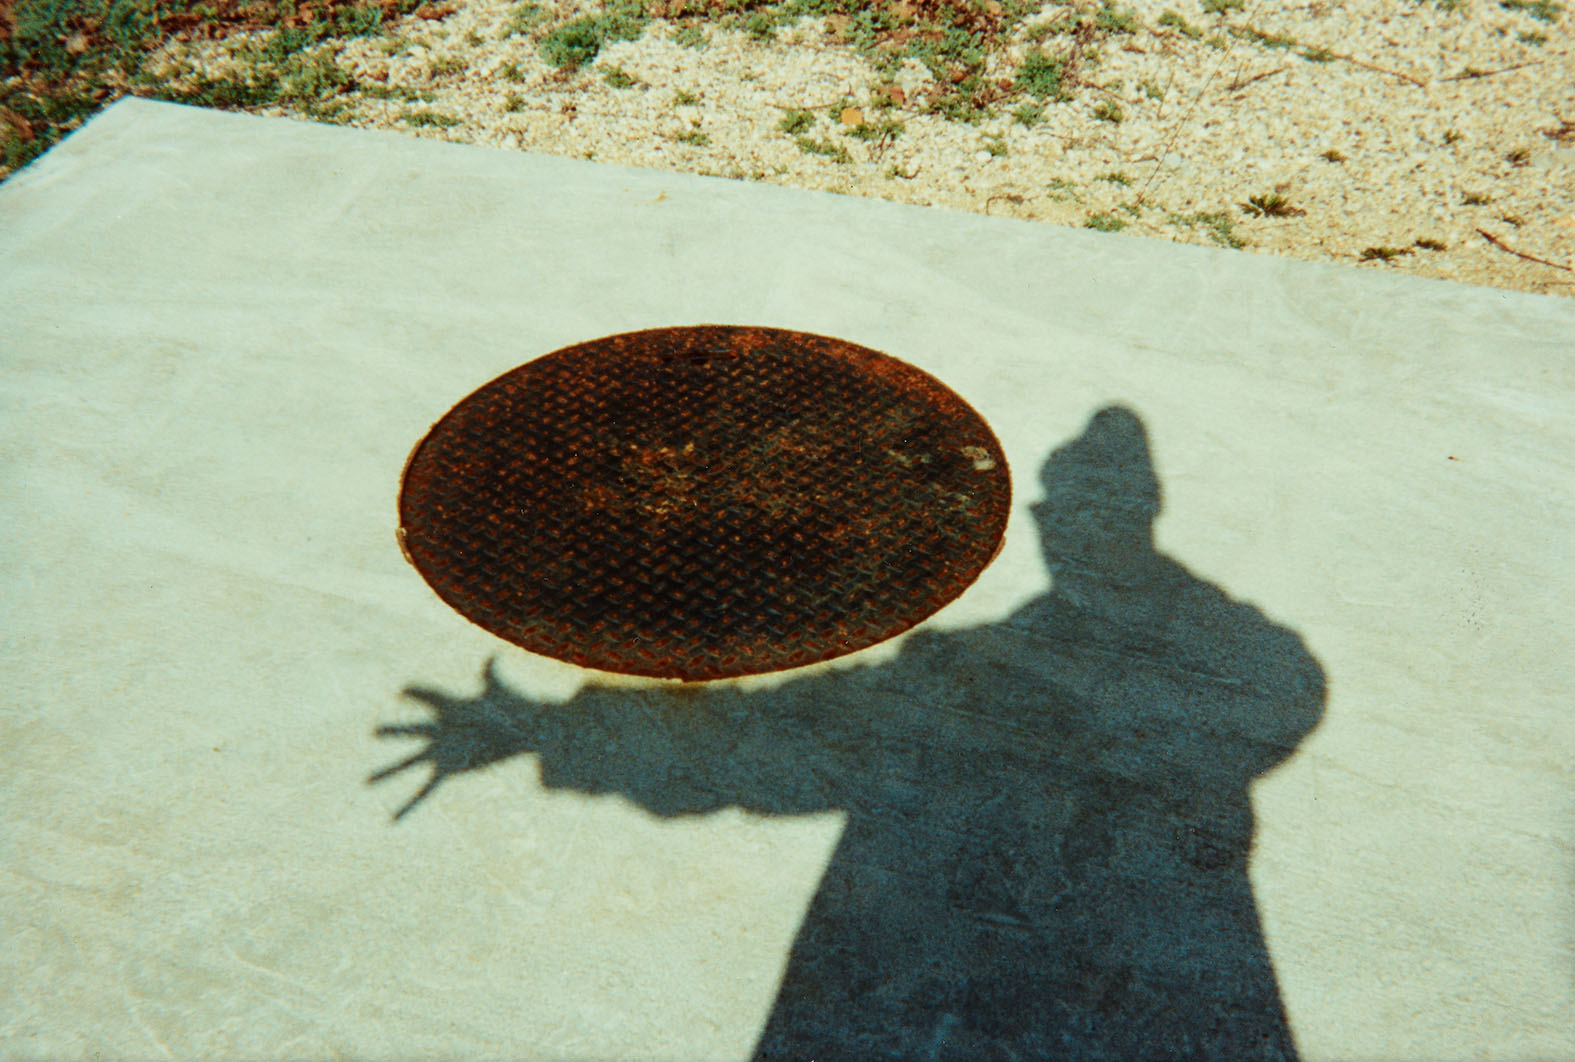 Shadow and manhole, spring 1992